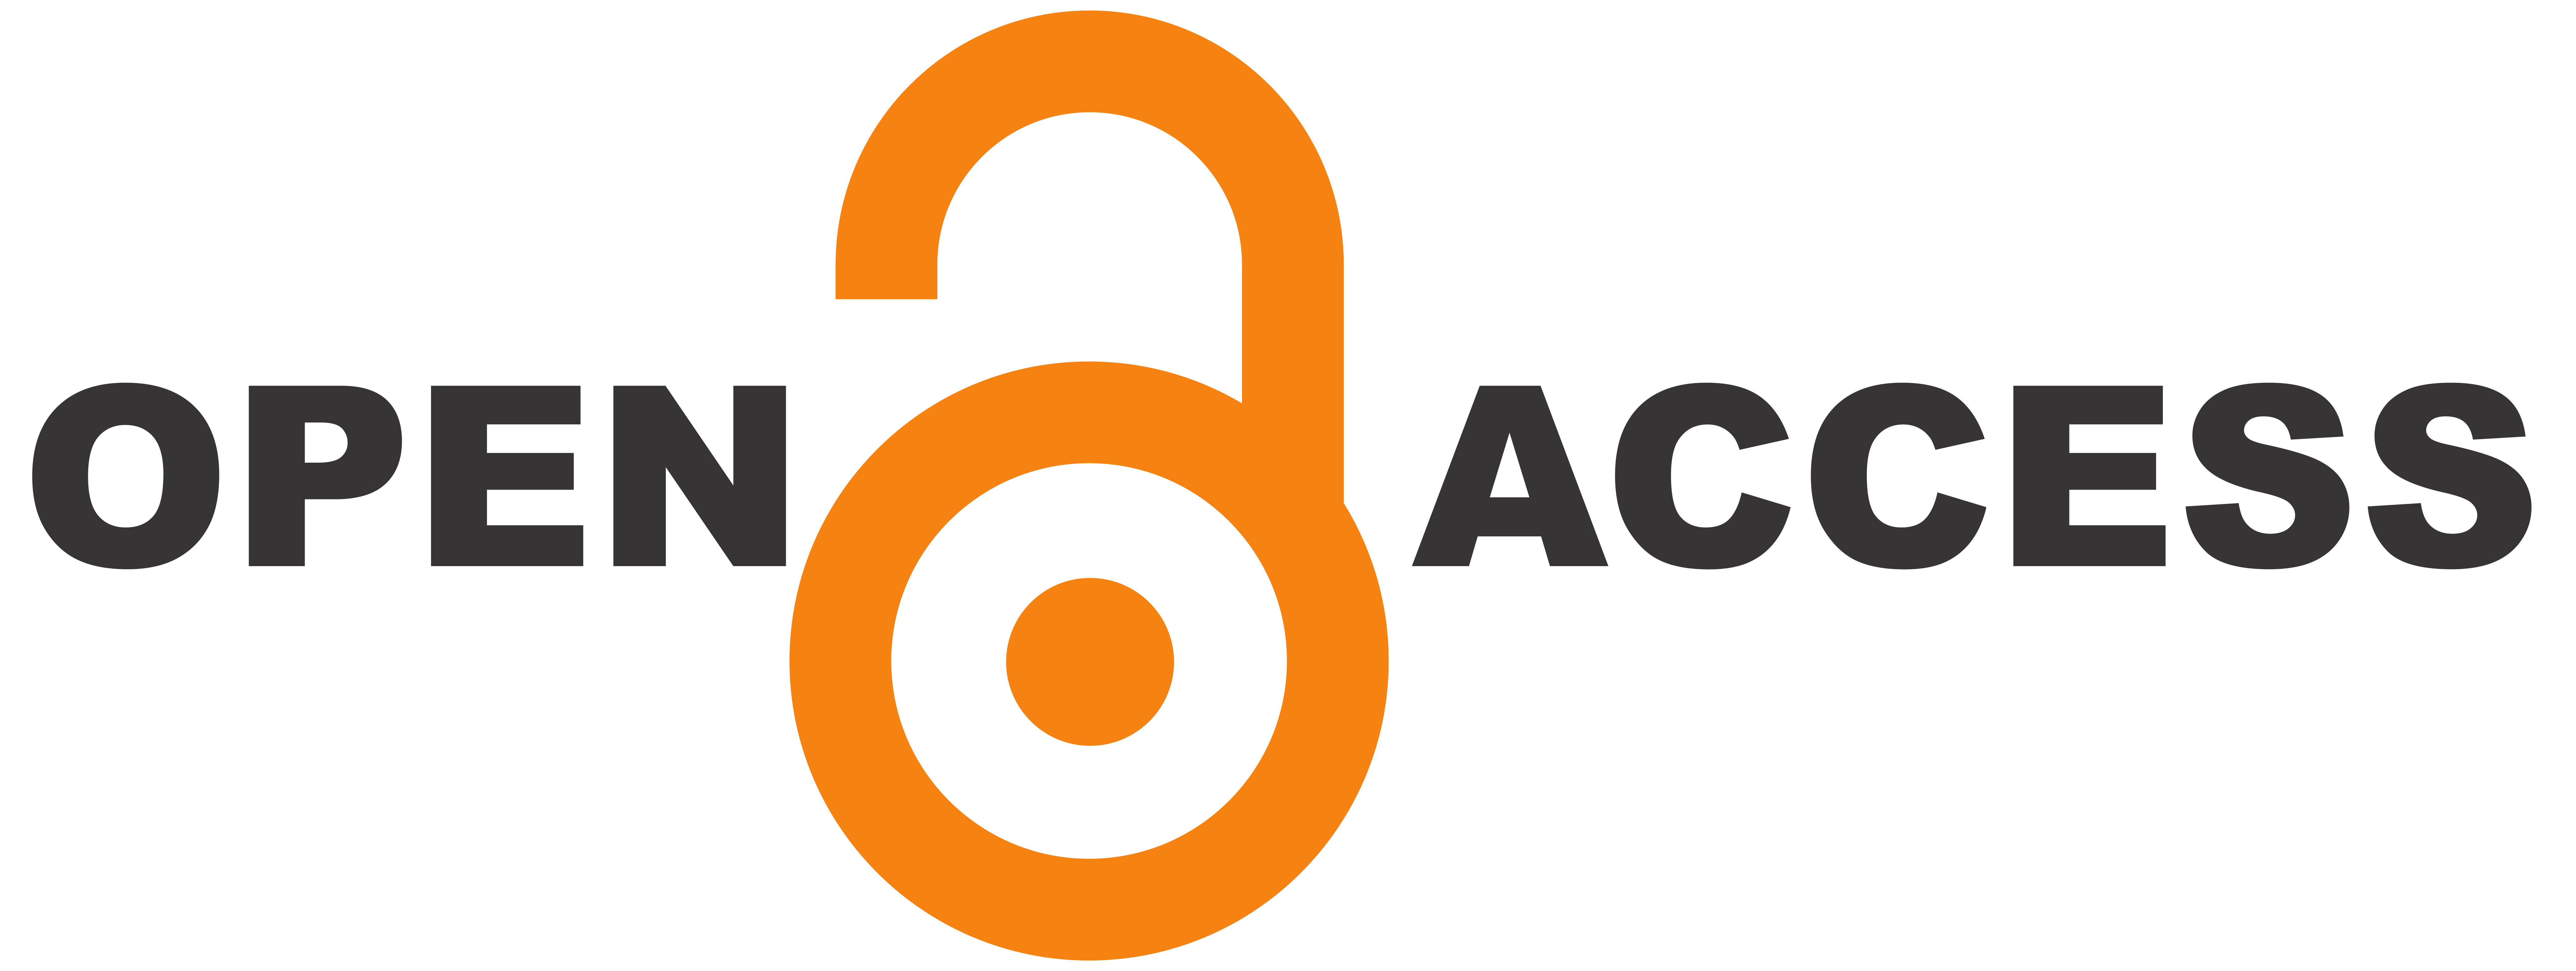 16_Open_Access_logo_with_dark_text_for_contrast,_on_transparent_background.png